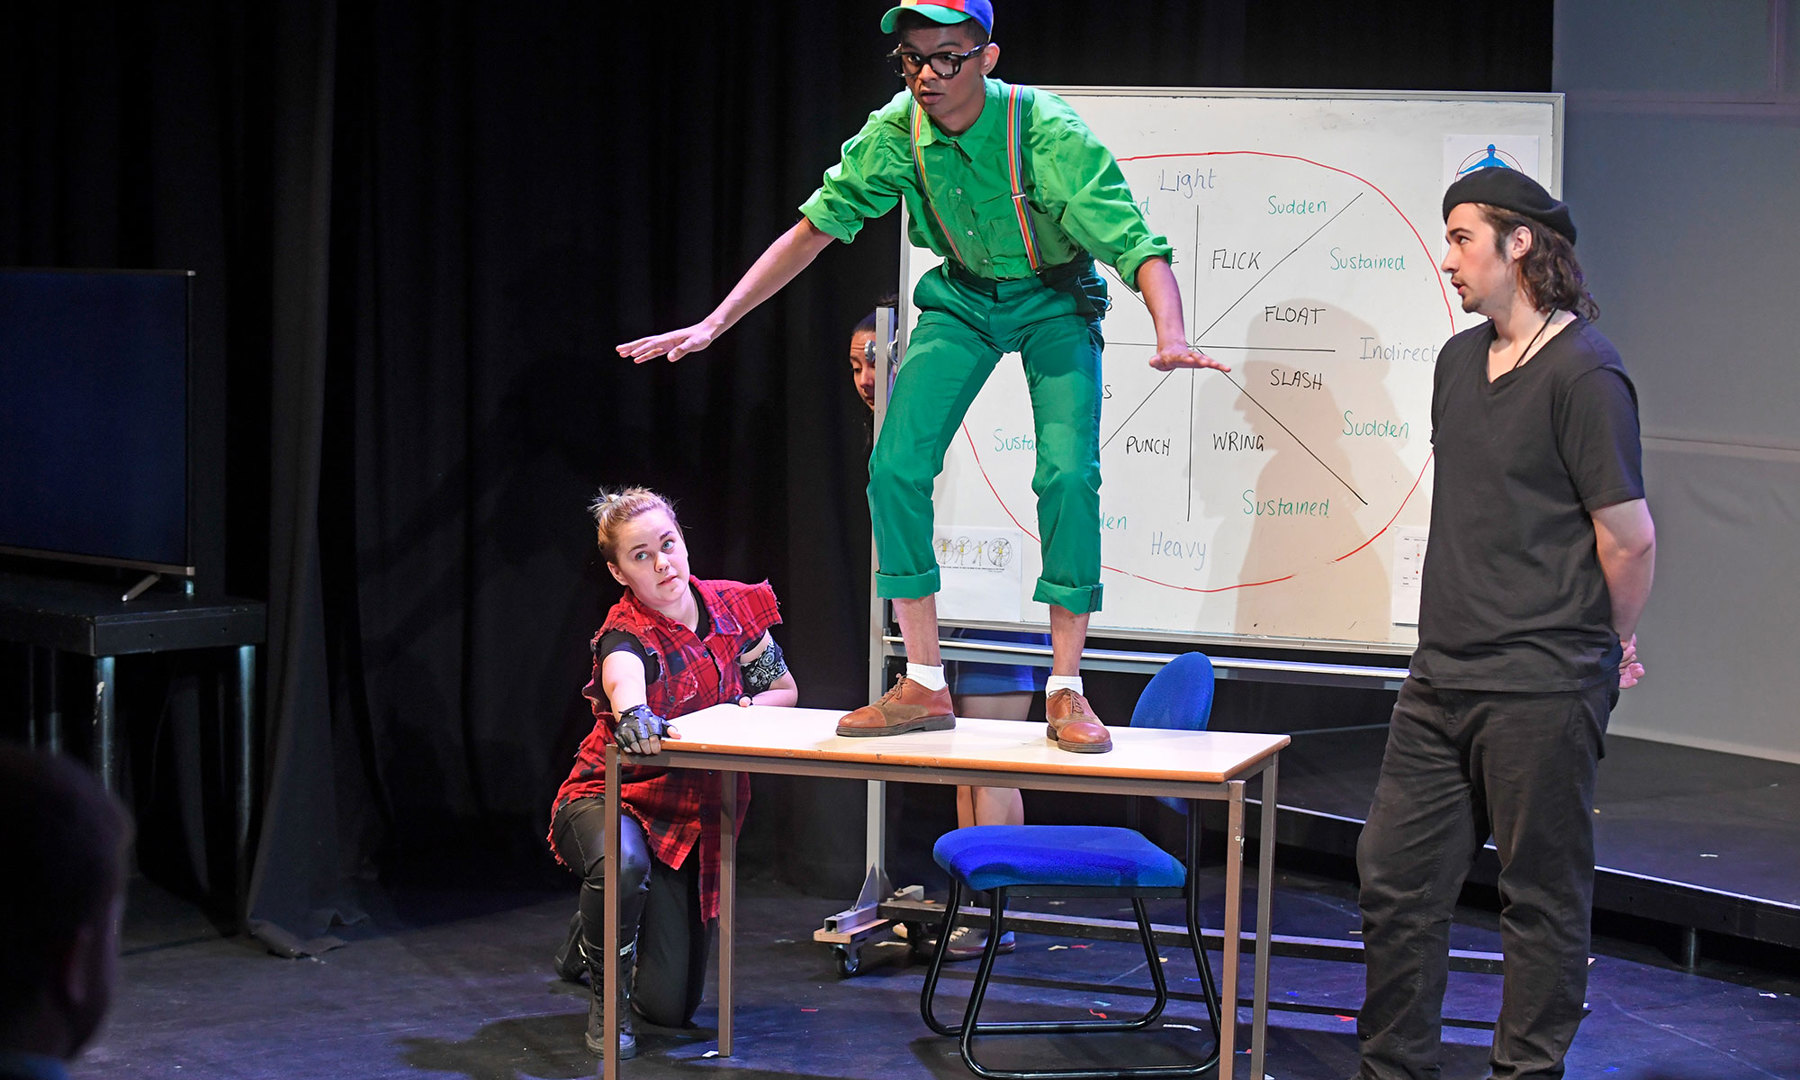 Stage Performance with actor dressed in green balancing on table